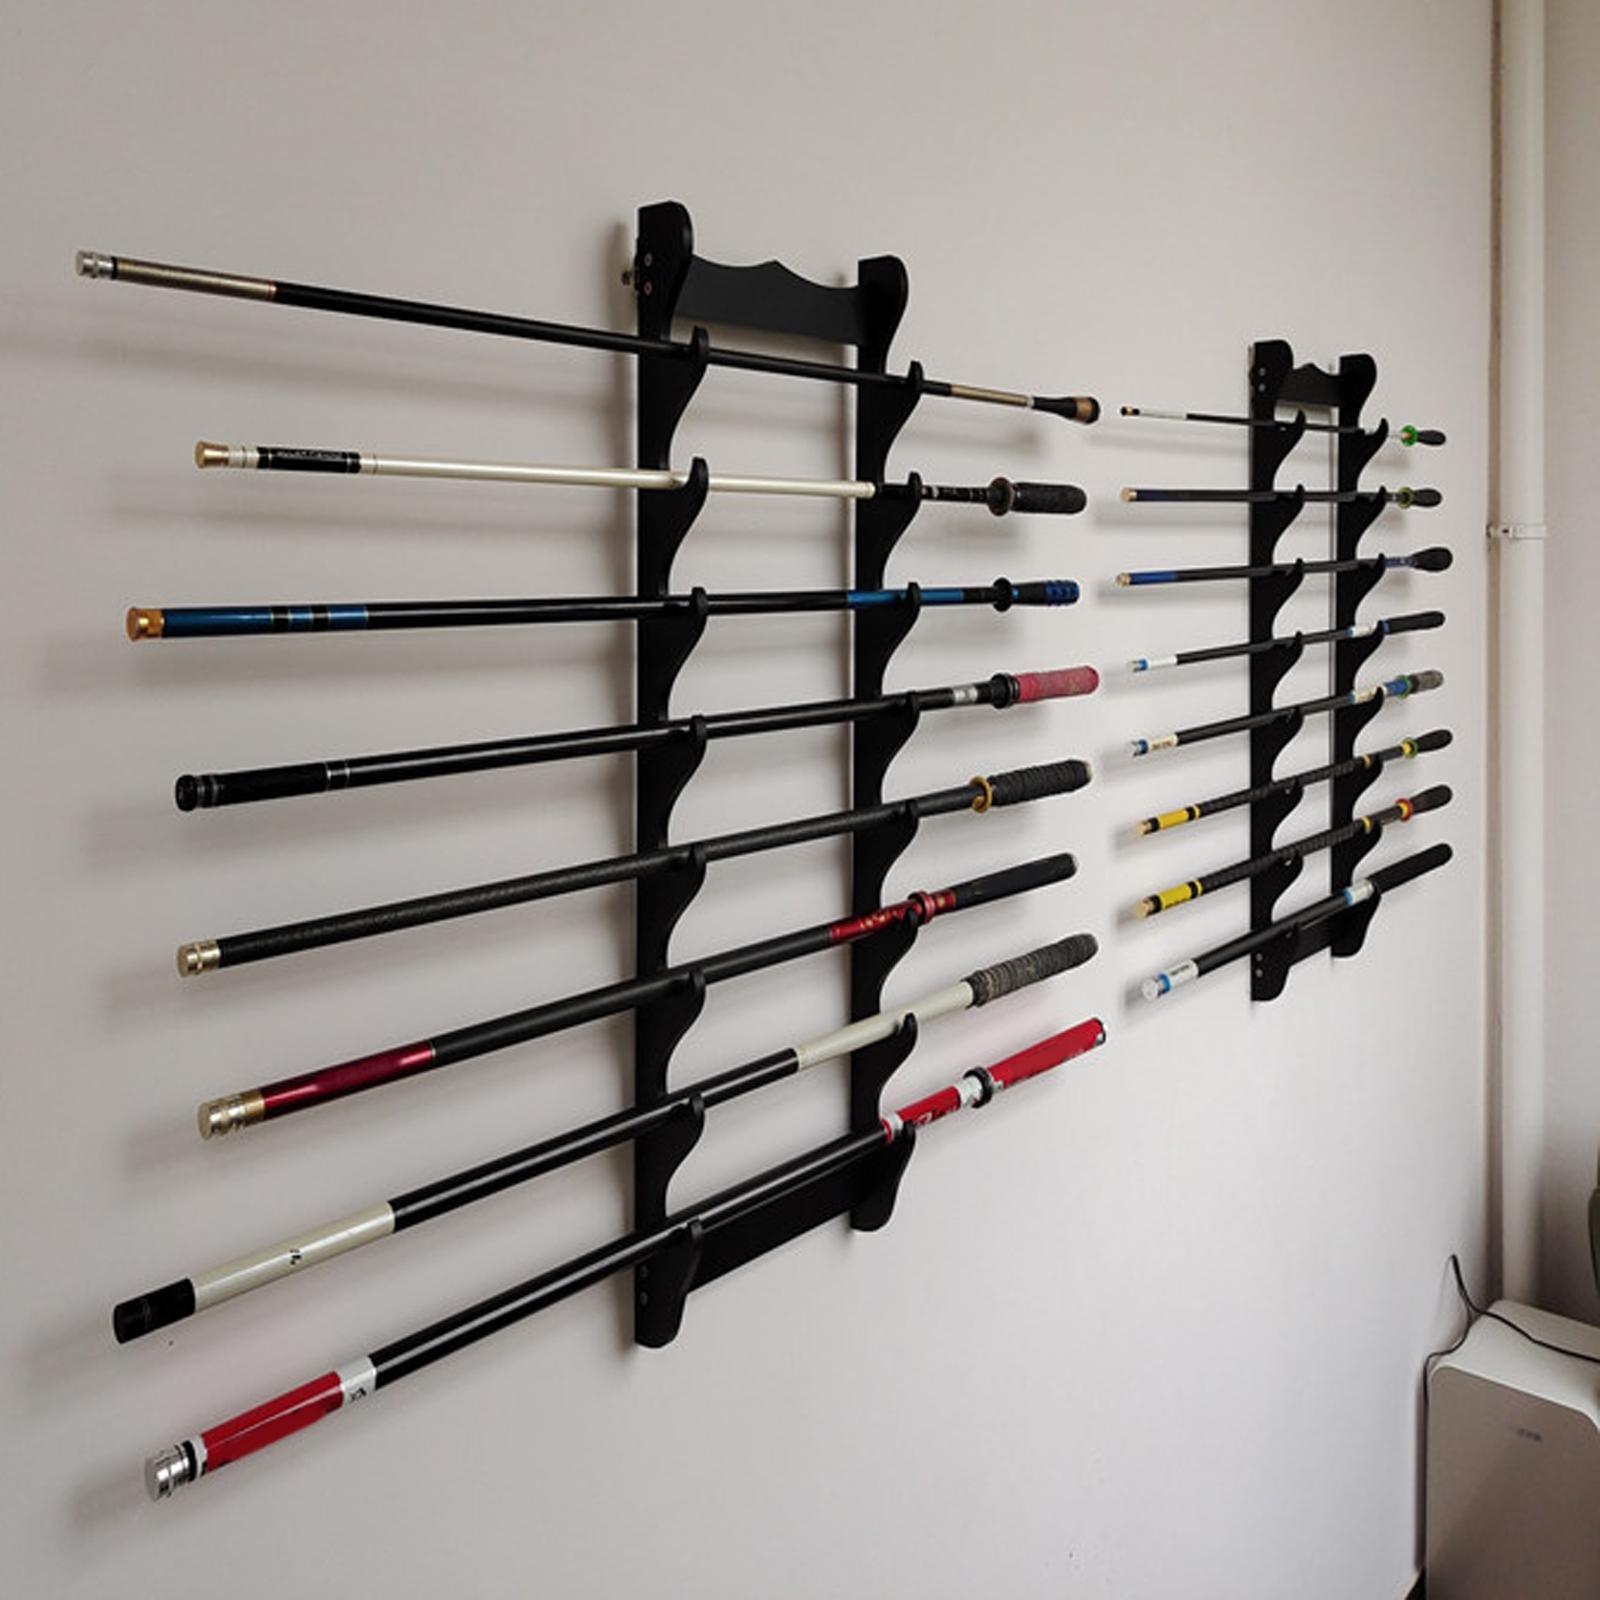 Fishing Rod Rack of Wall Mounted Holds 8 Fishing Rods for Home Cabin Garage